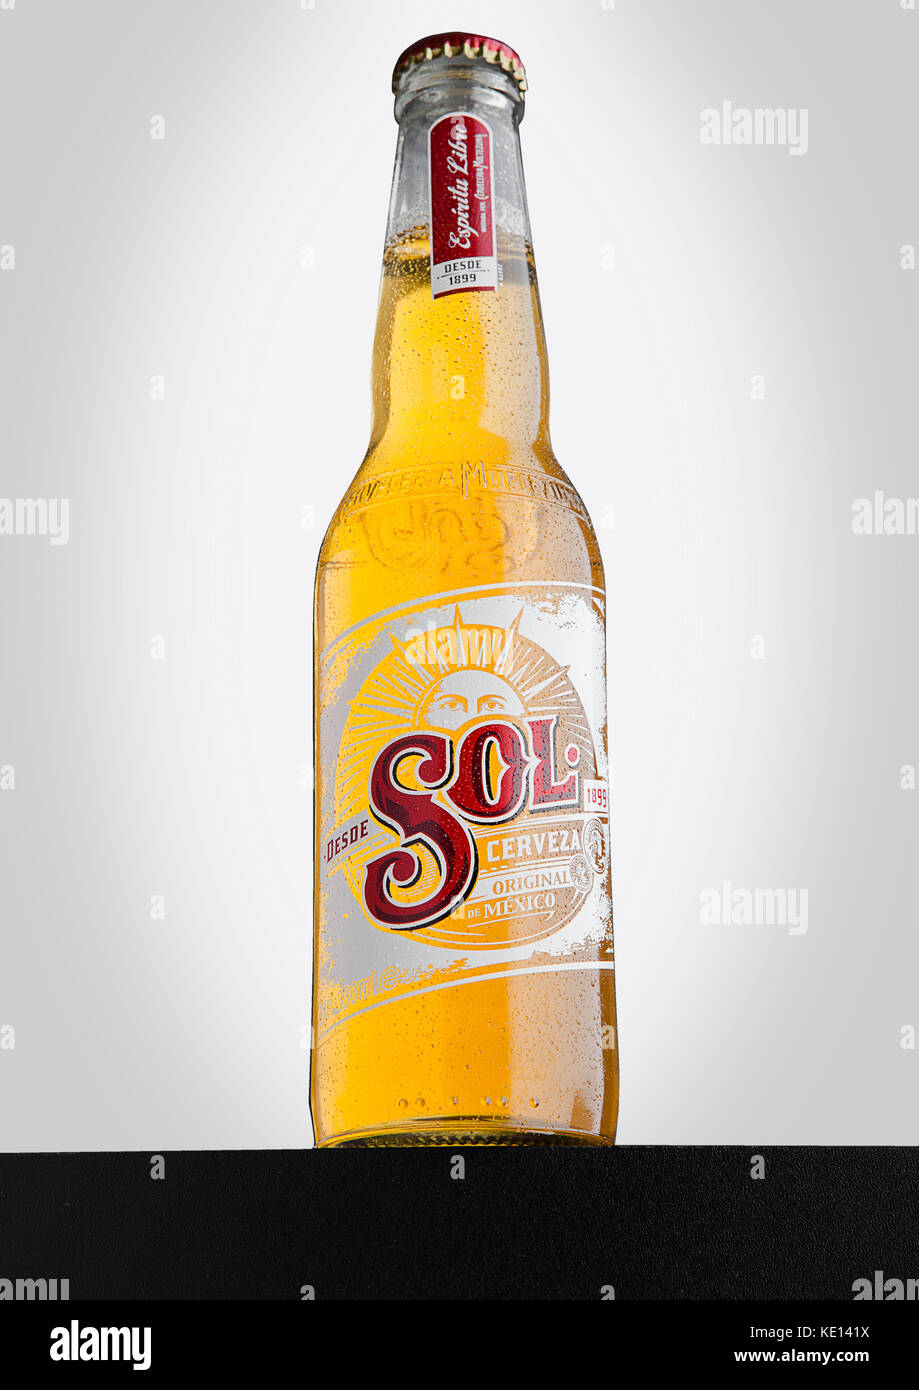 LONDON, UK - DECEMBER 15, 2016: Bottle of Sol Mexican Beer on white background. From the Cuauhtemoc Moctezuma Brewery, in Monterey, Mexico, it was fir Stock Photo